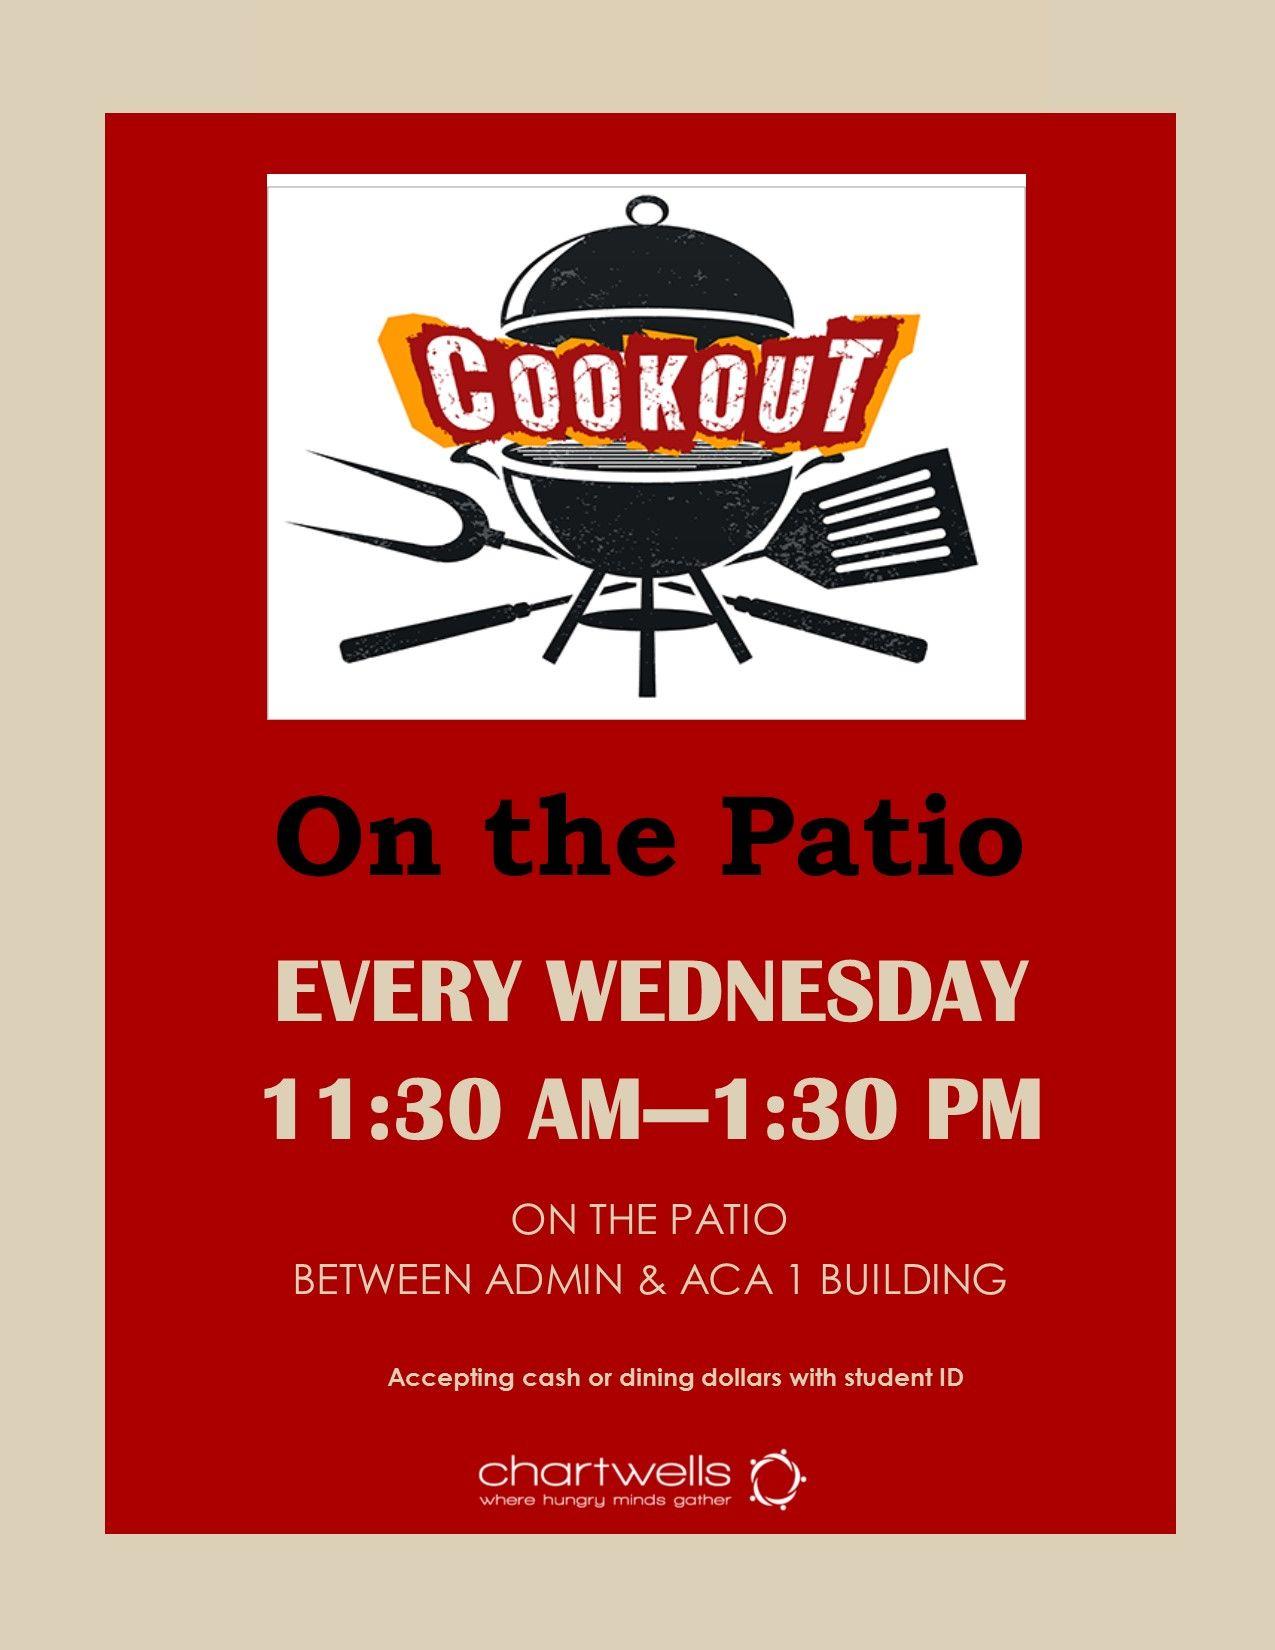 Cookout Logo - Dine On Campus at New York Chiropractic College || Events